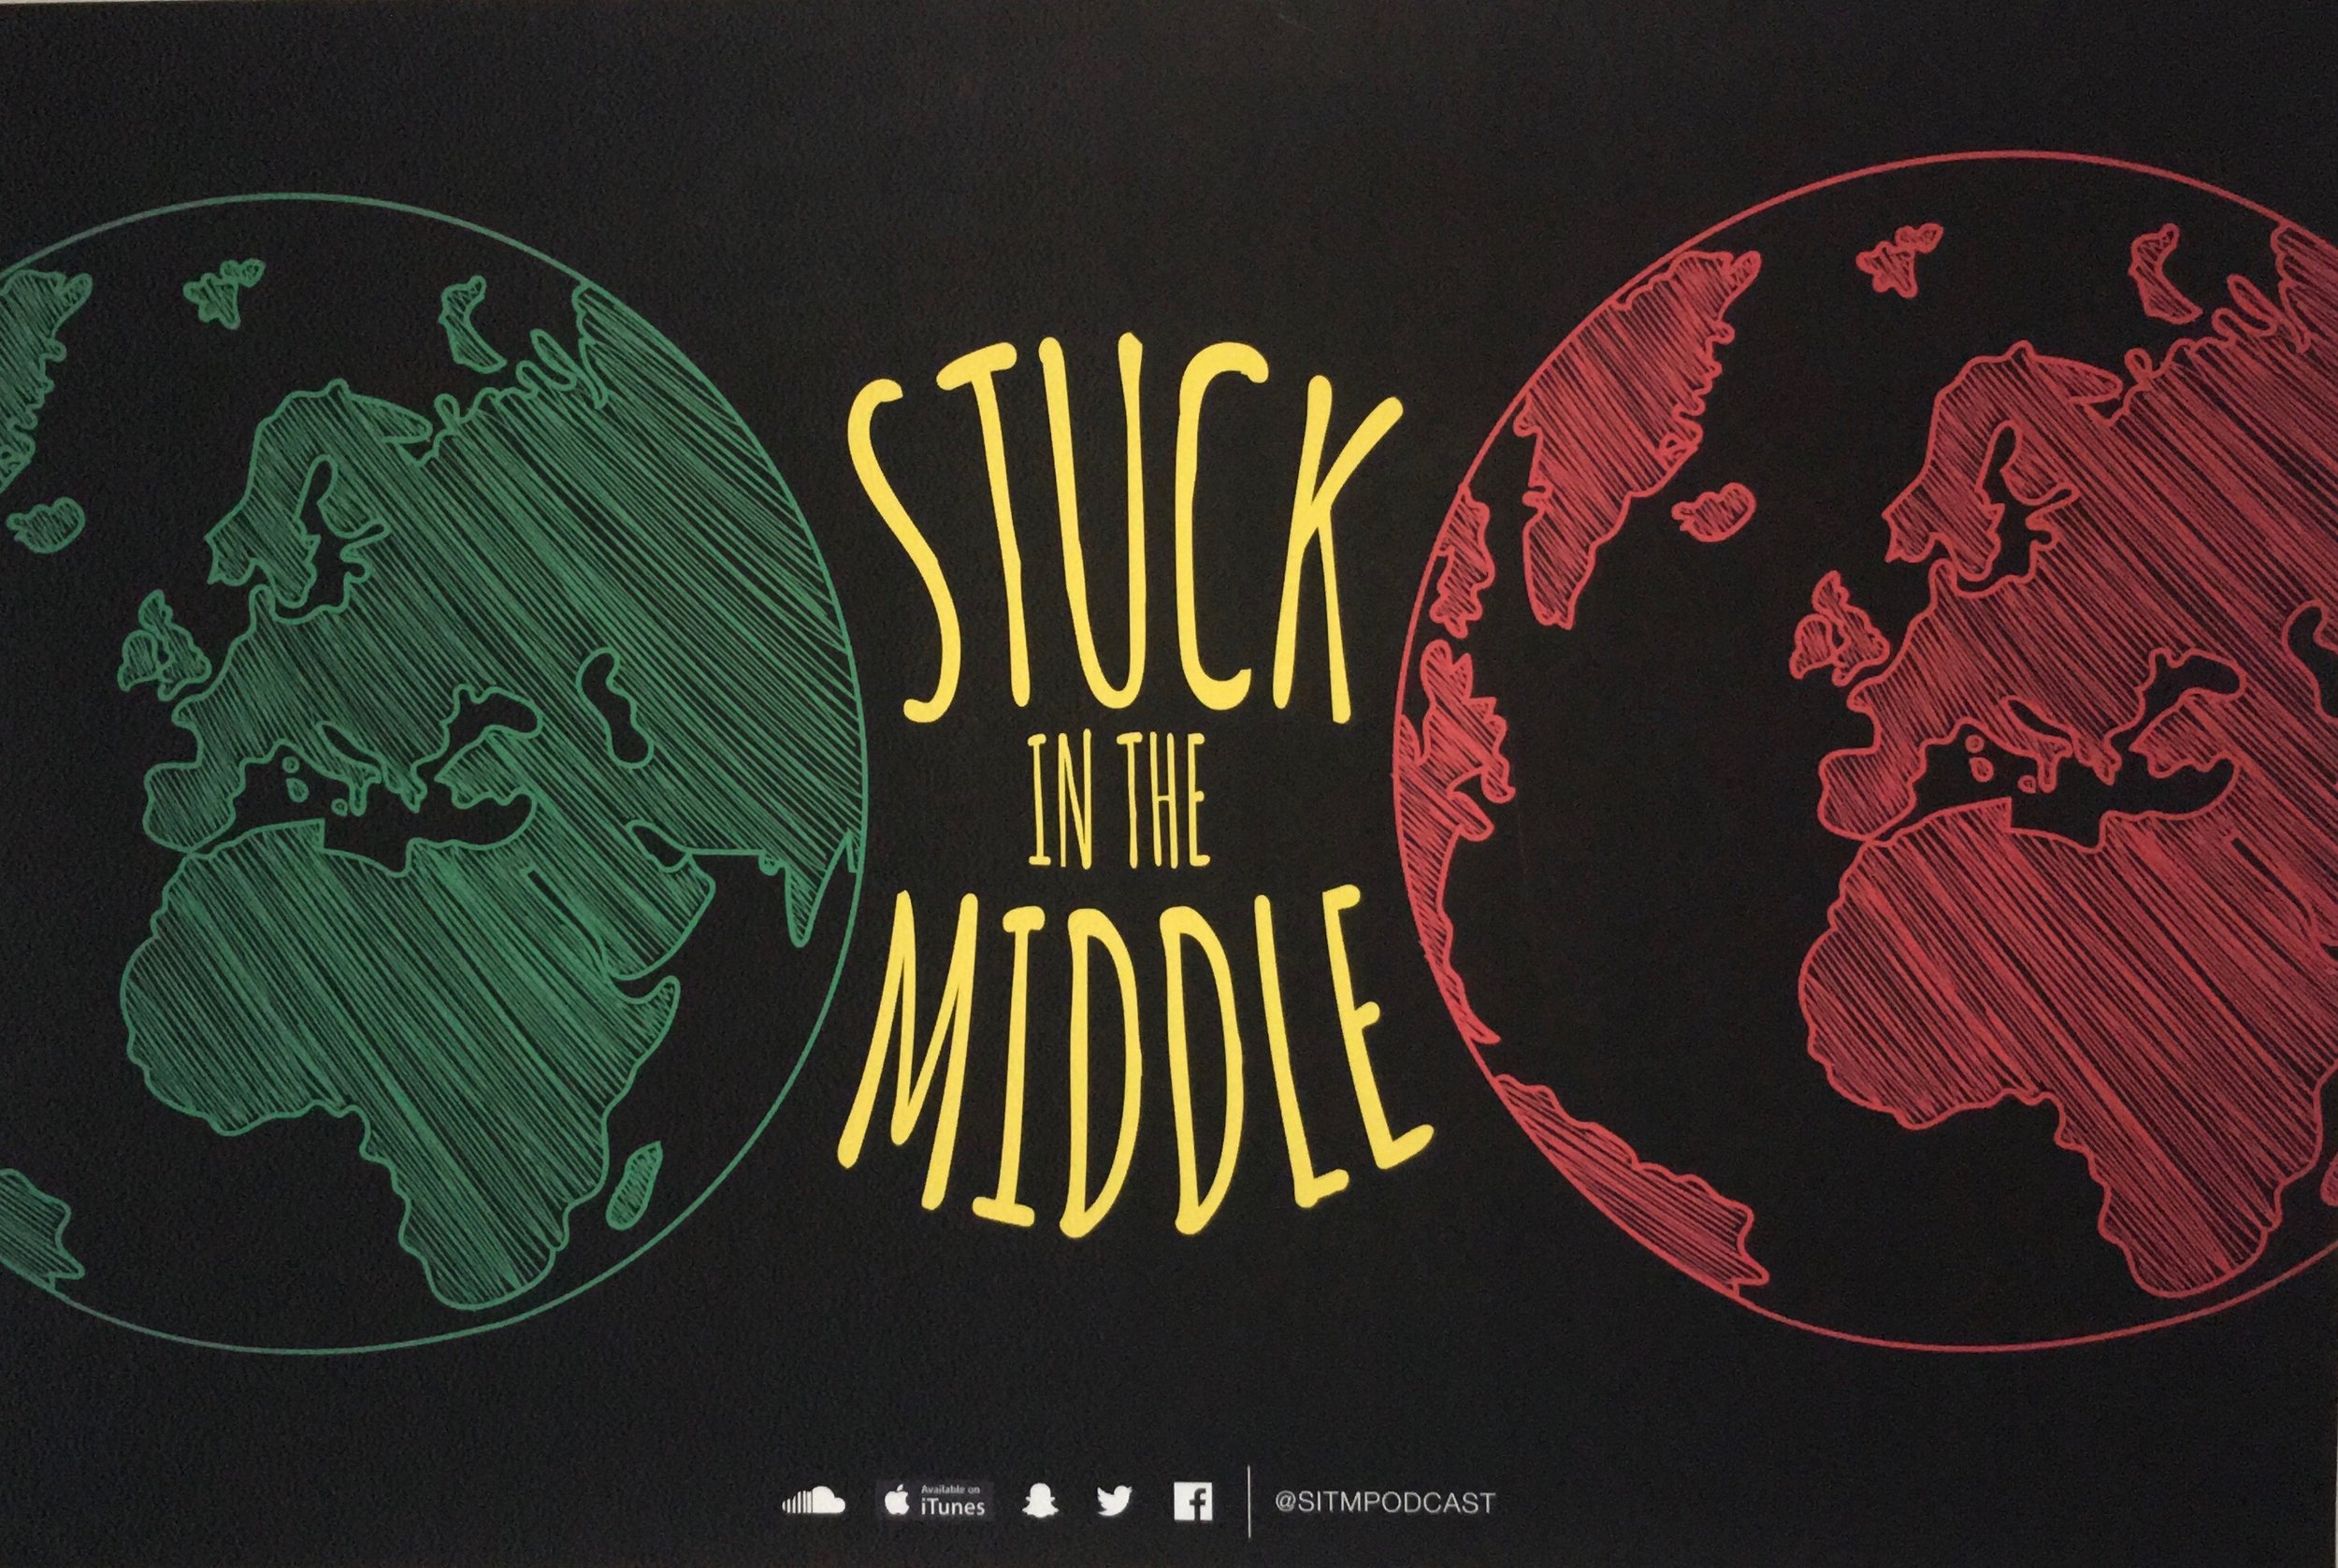 Stuck In The Middle Podcast